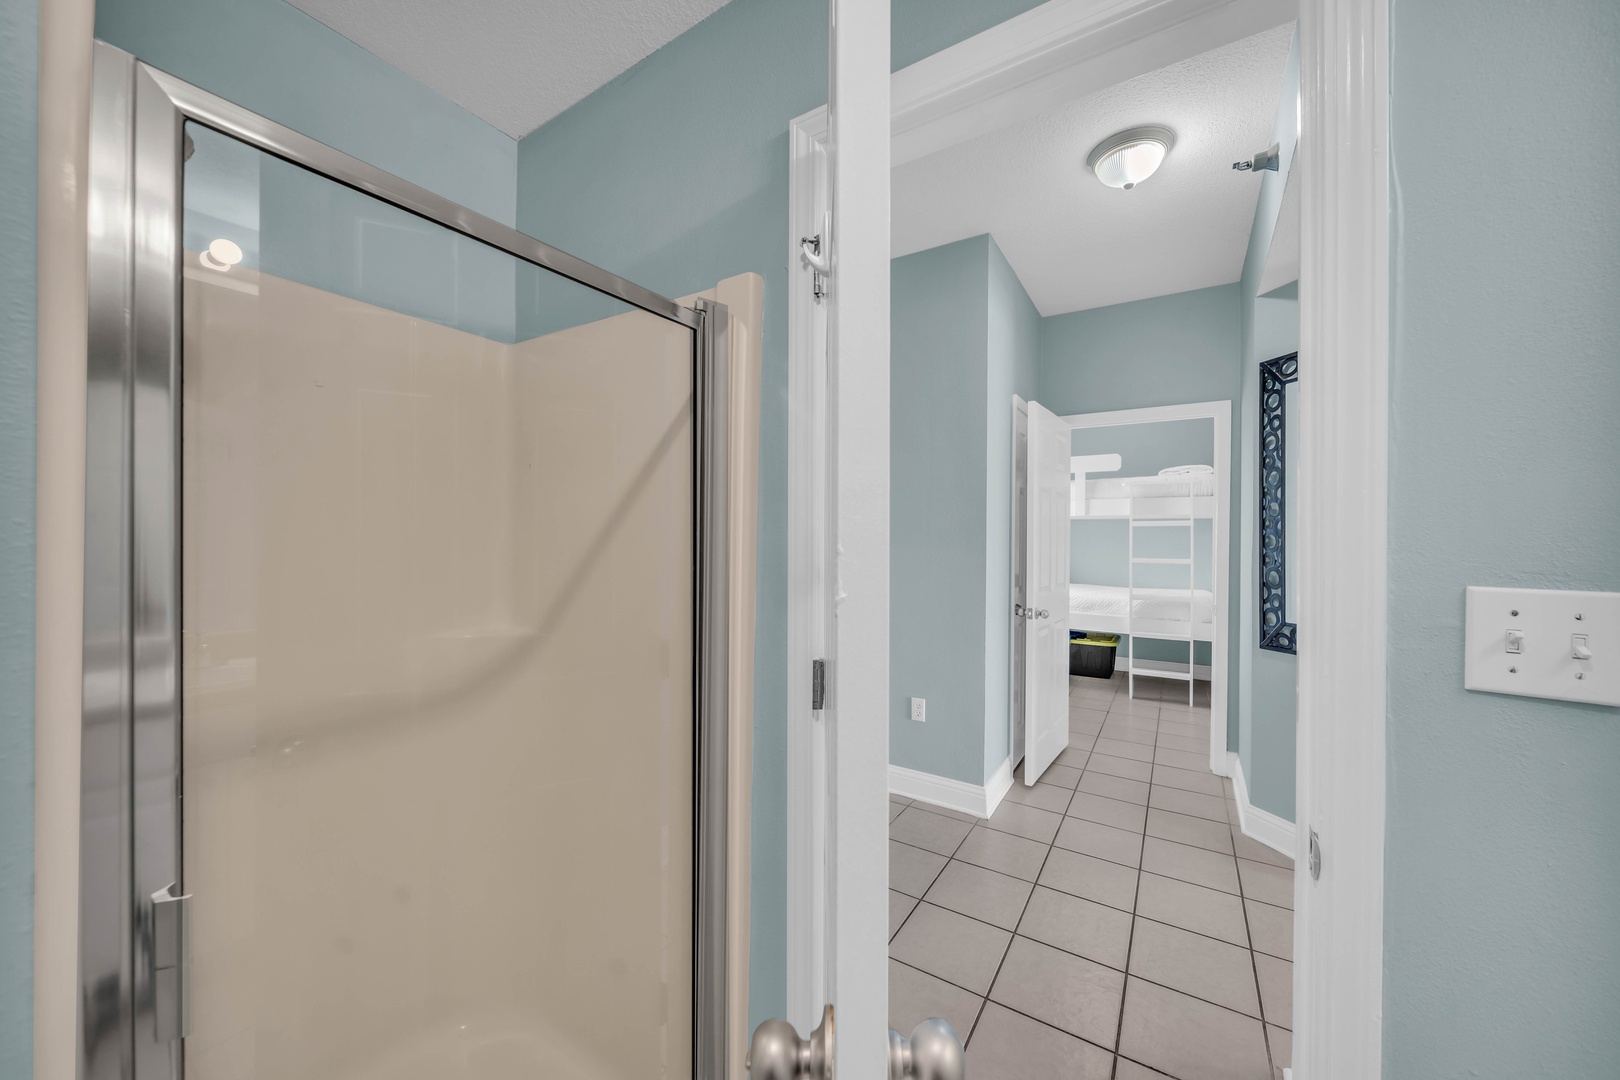 A second full bath in the hallway caters to the Bunk Room and drop-in guests.